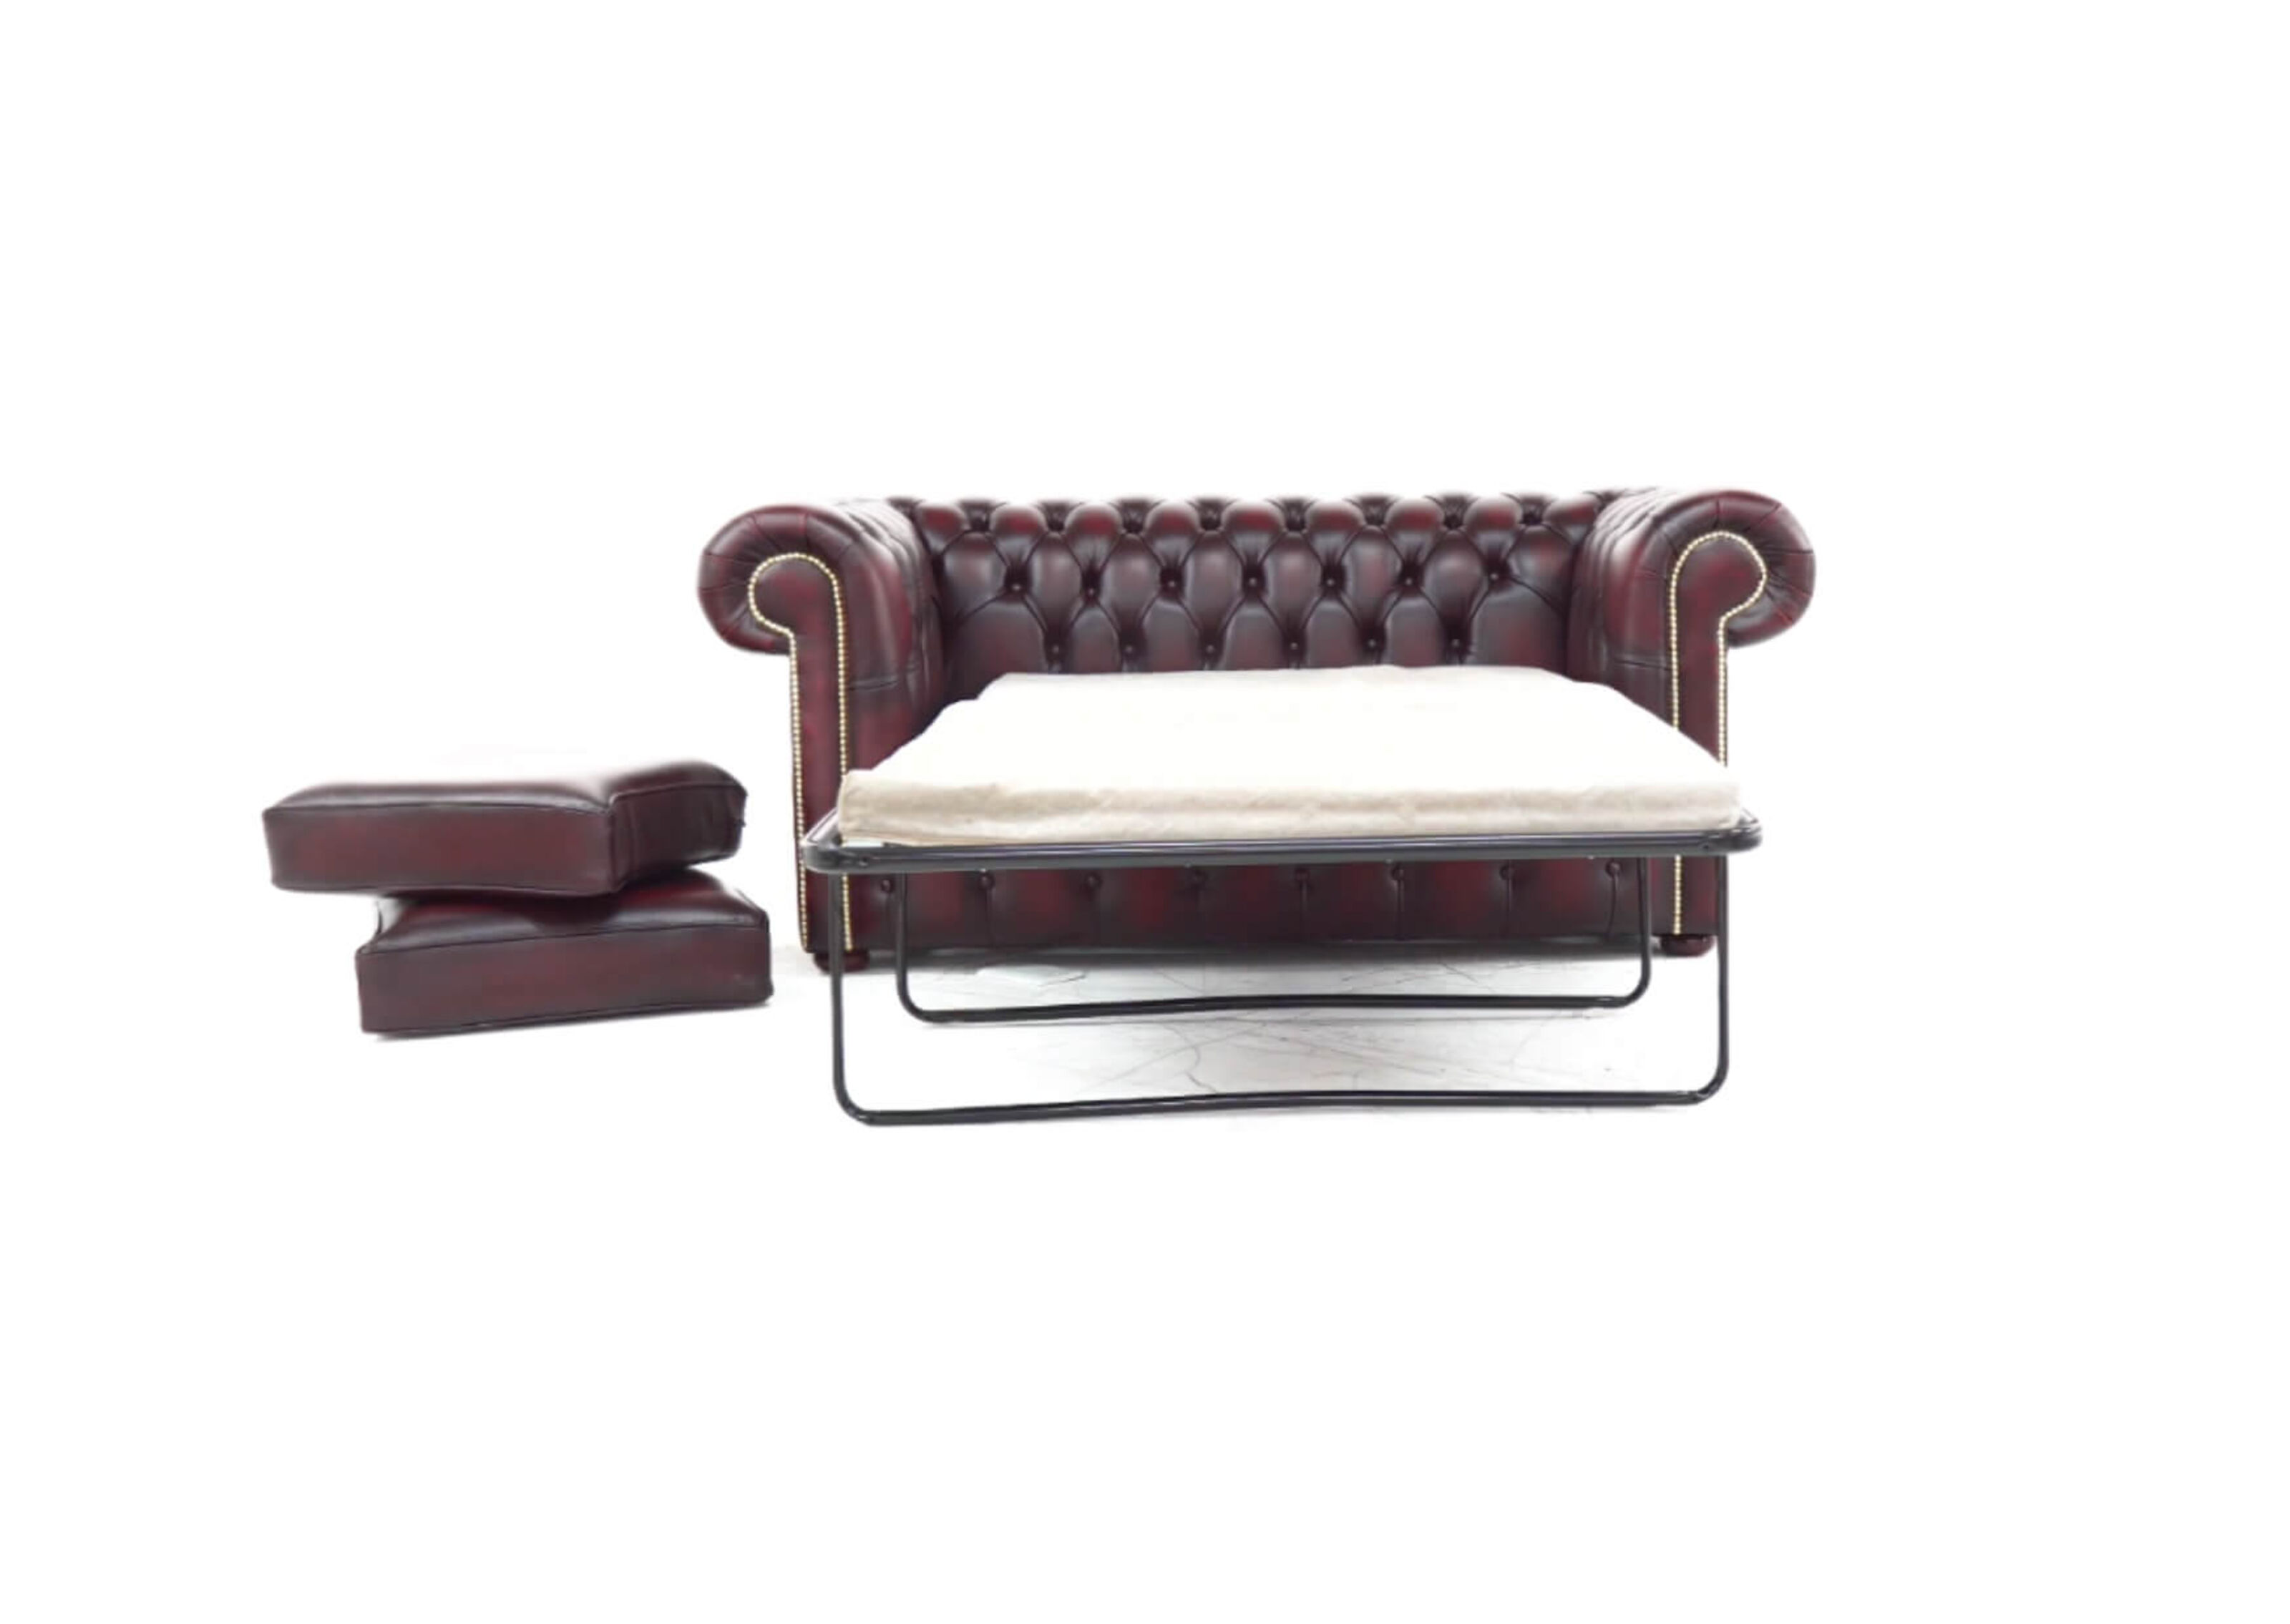 Chesterfield Furniture: Timeless Elegance that Never Goes Out of Style  %Post Title